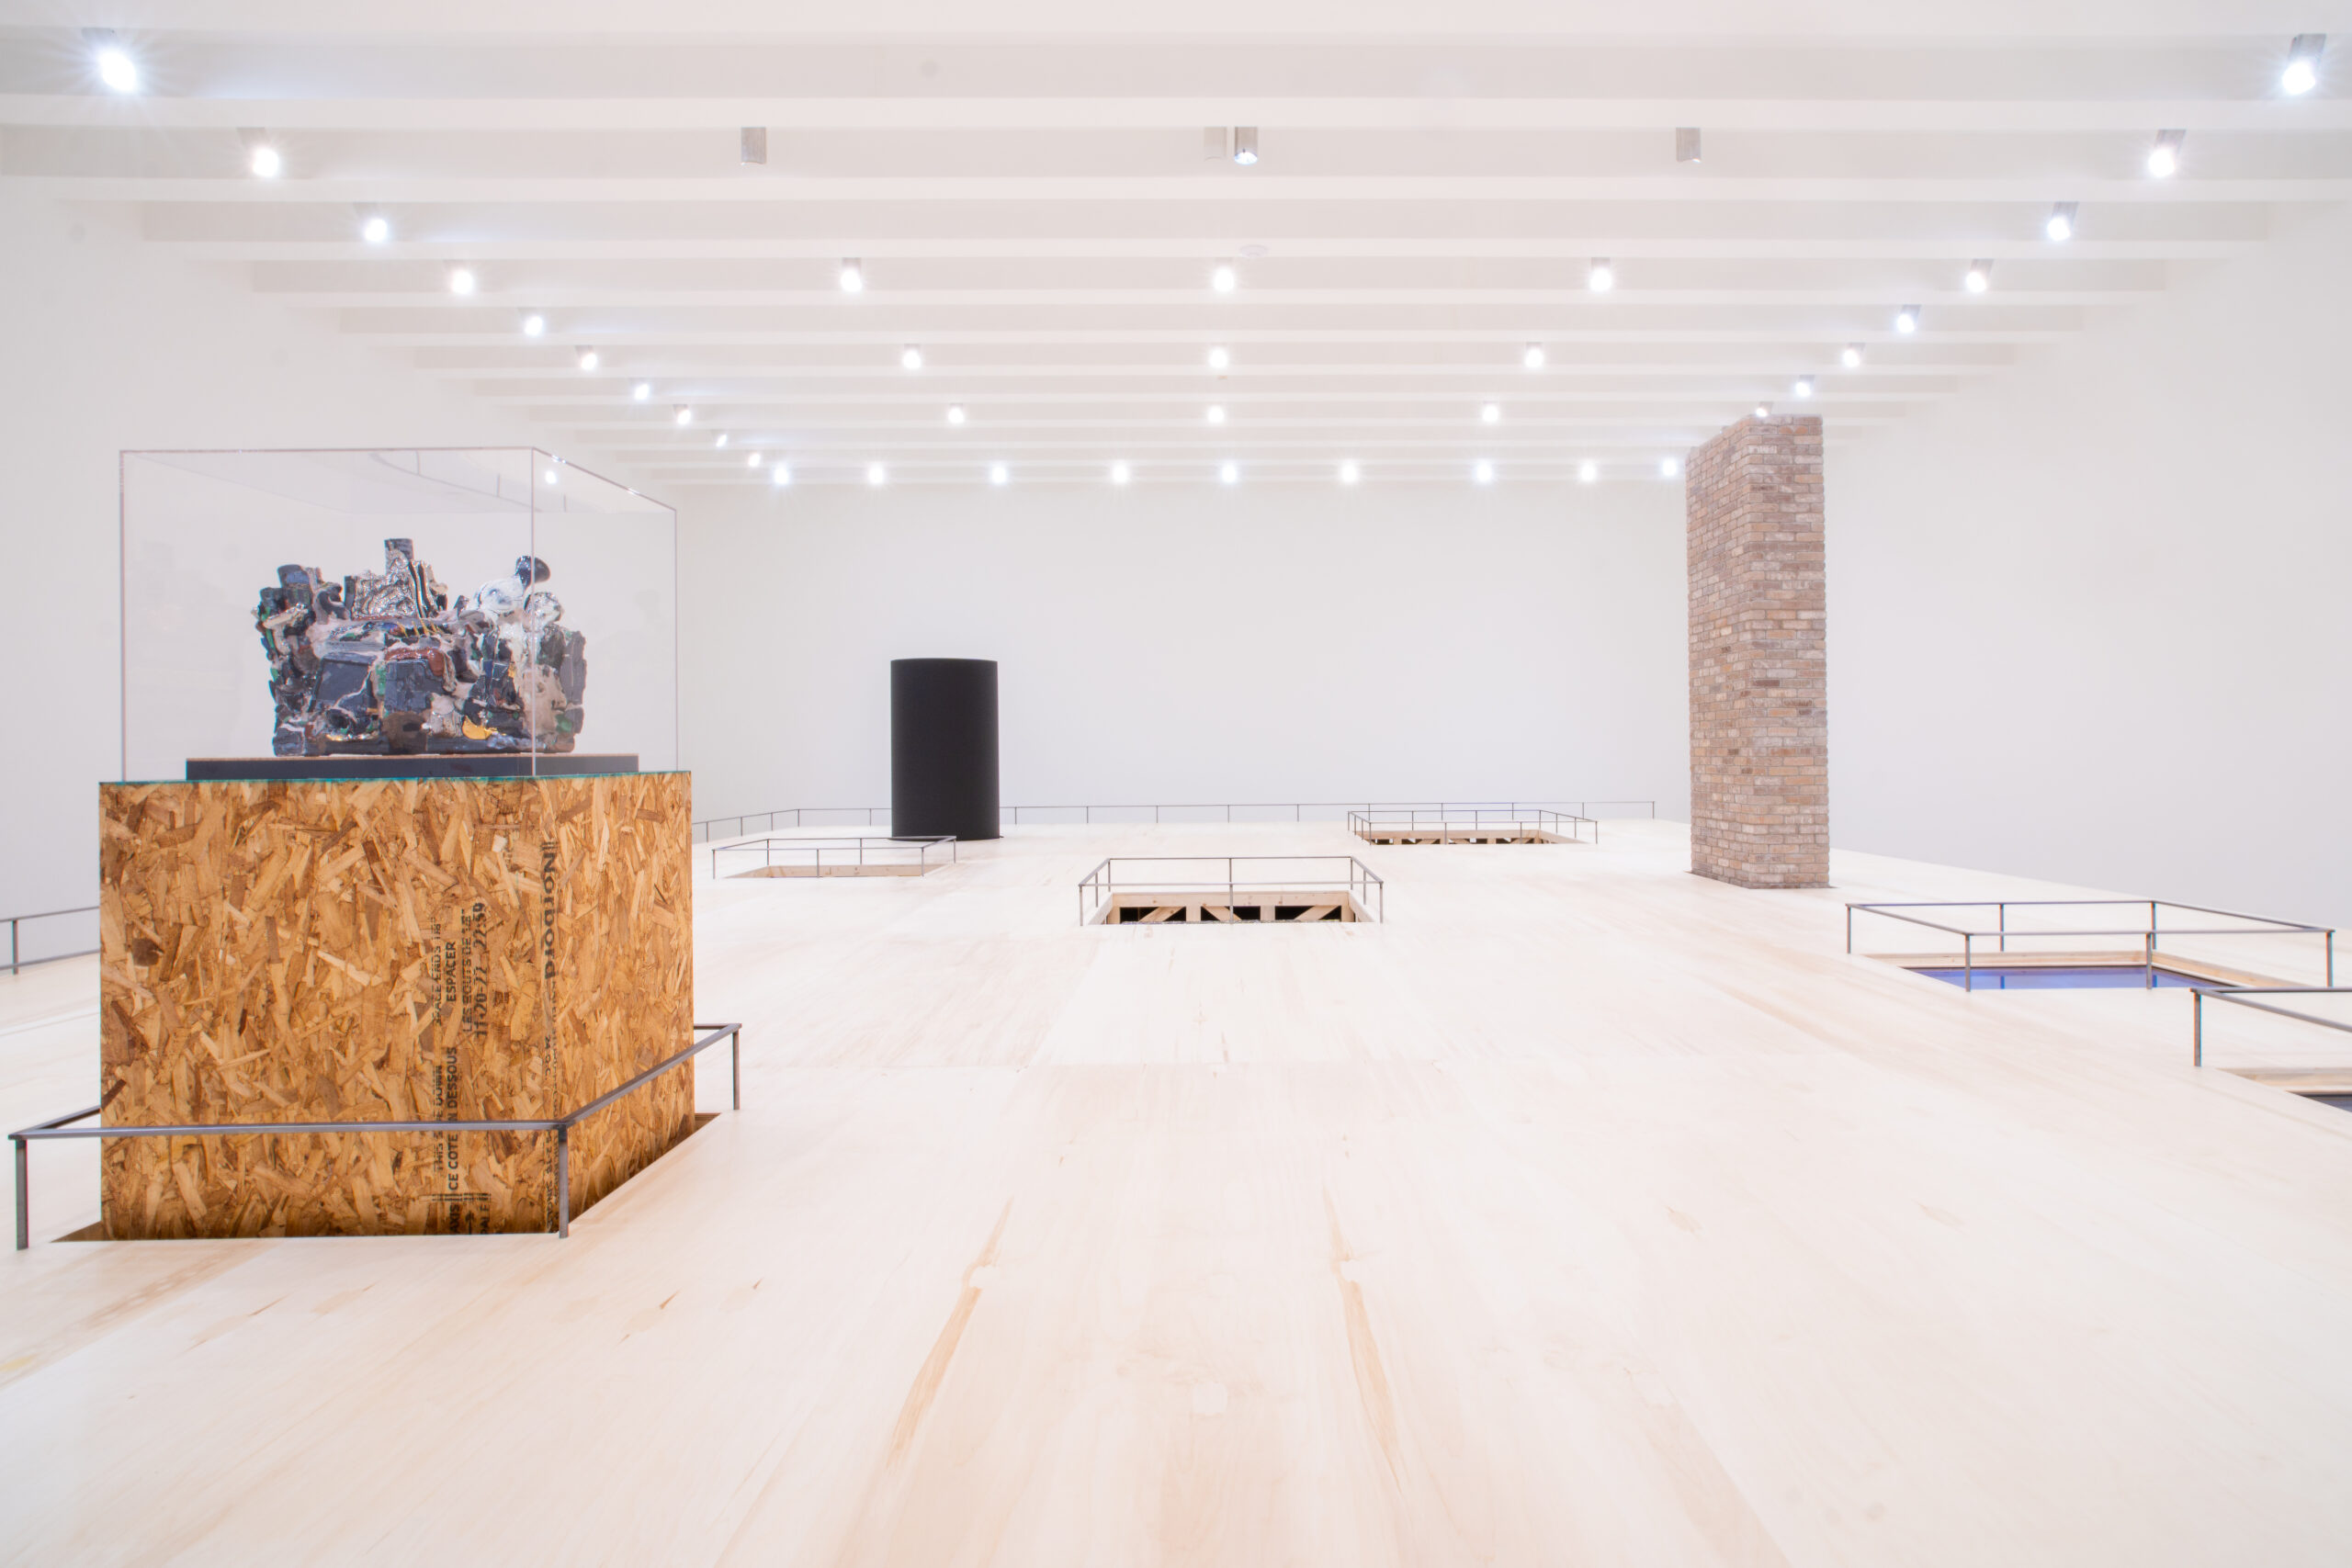 Gallery with white walls, white ceiling, and light wood flooring with several sculptures, some recessed into the floor.